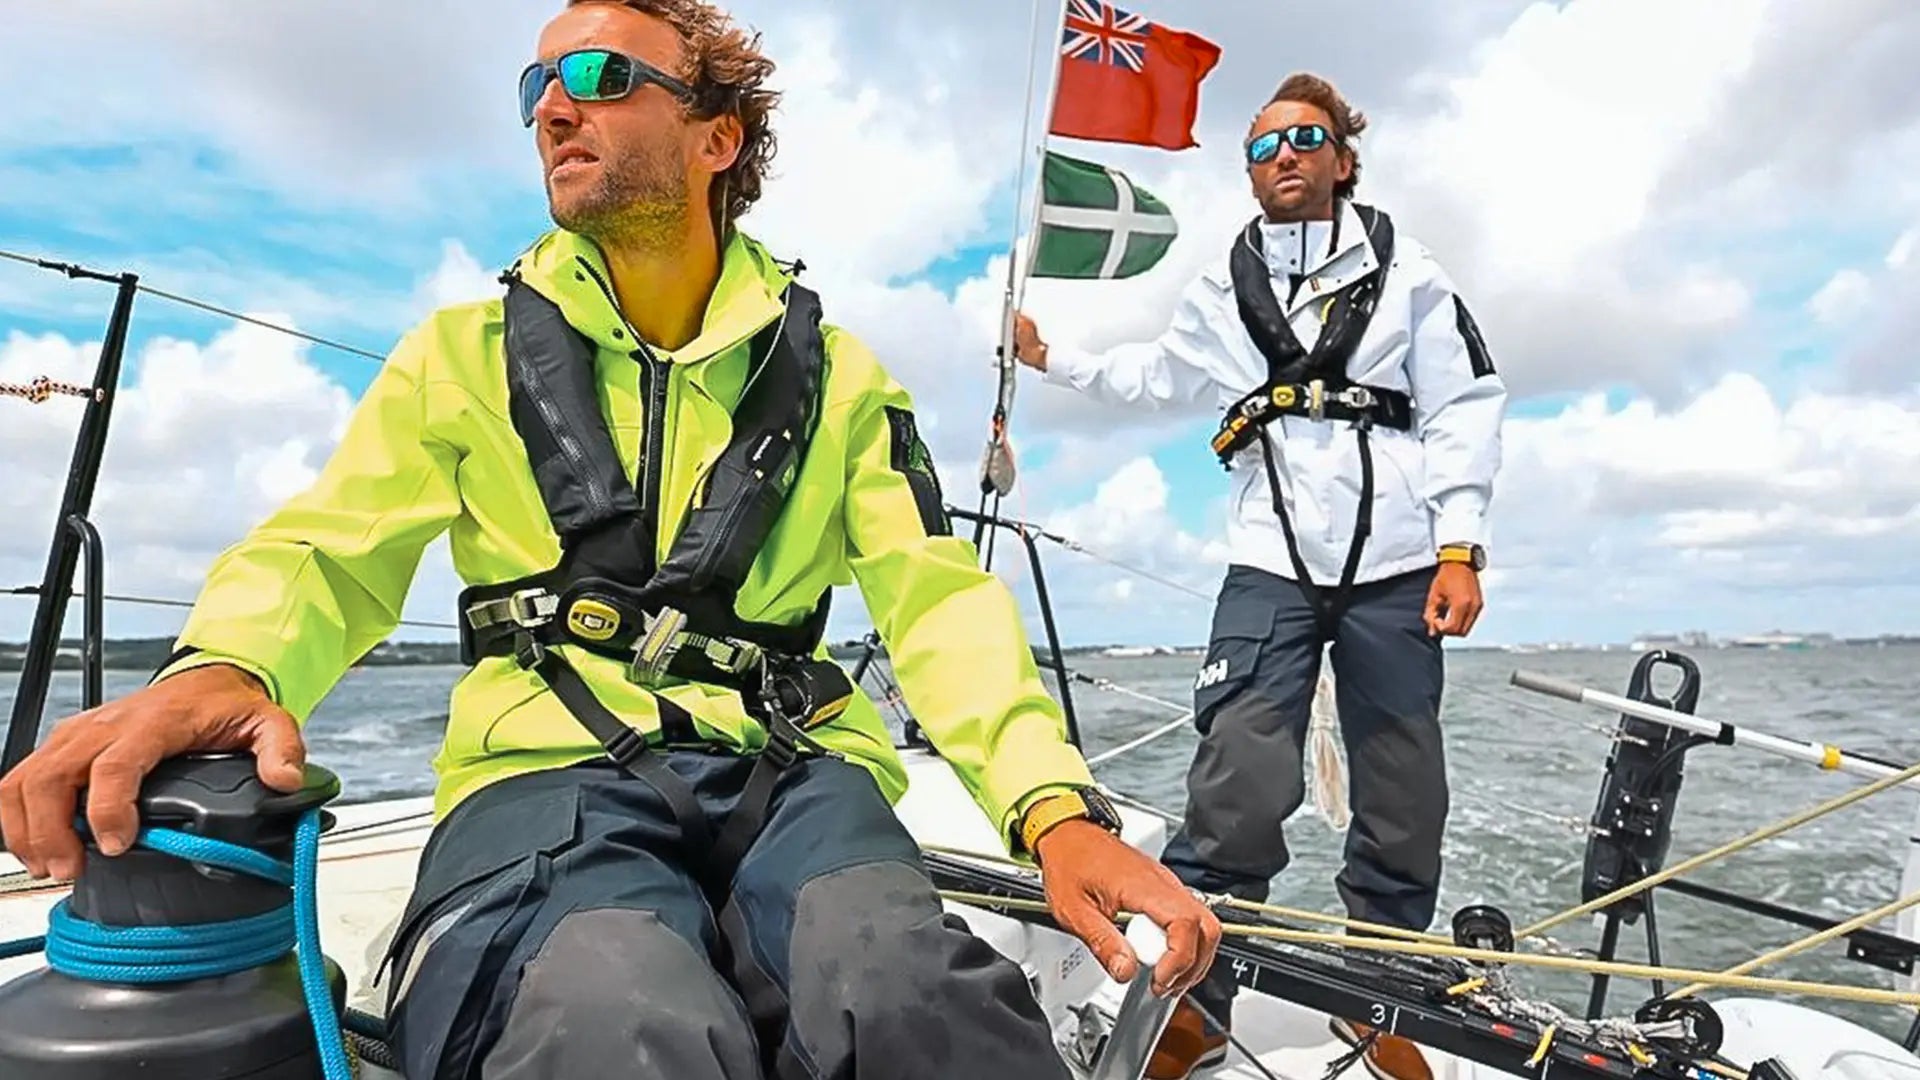 Smooth sailing: Essential skin protection tips for sailors braving the elements